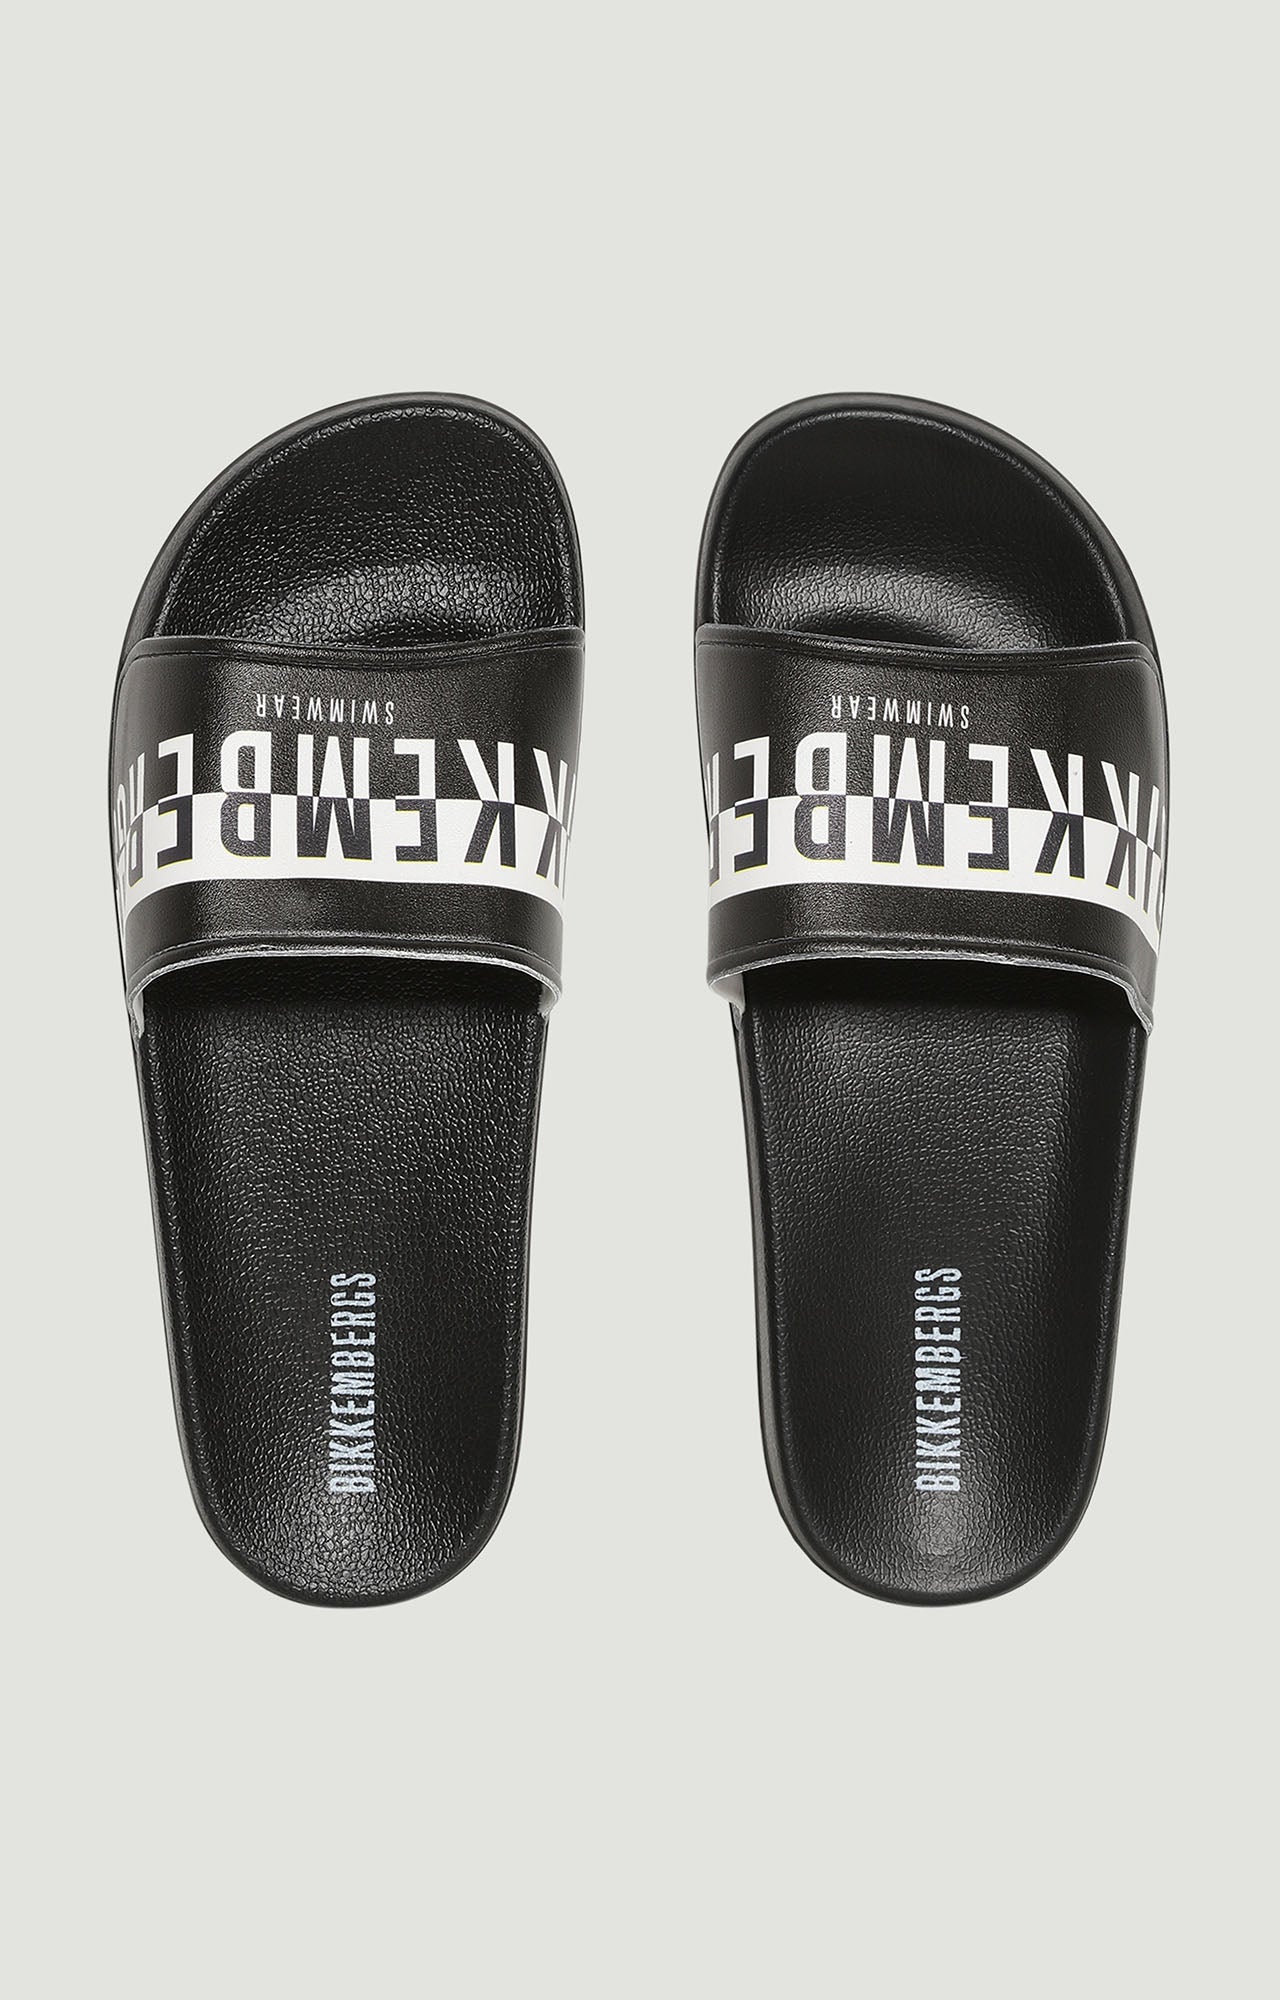 Men's pool sliders with double tape